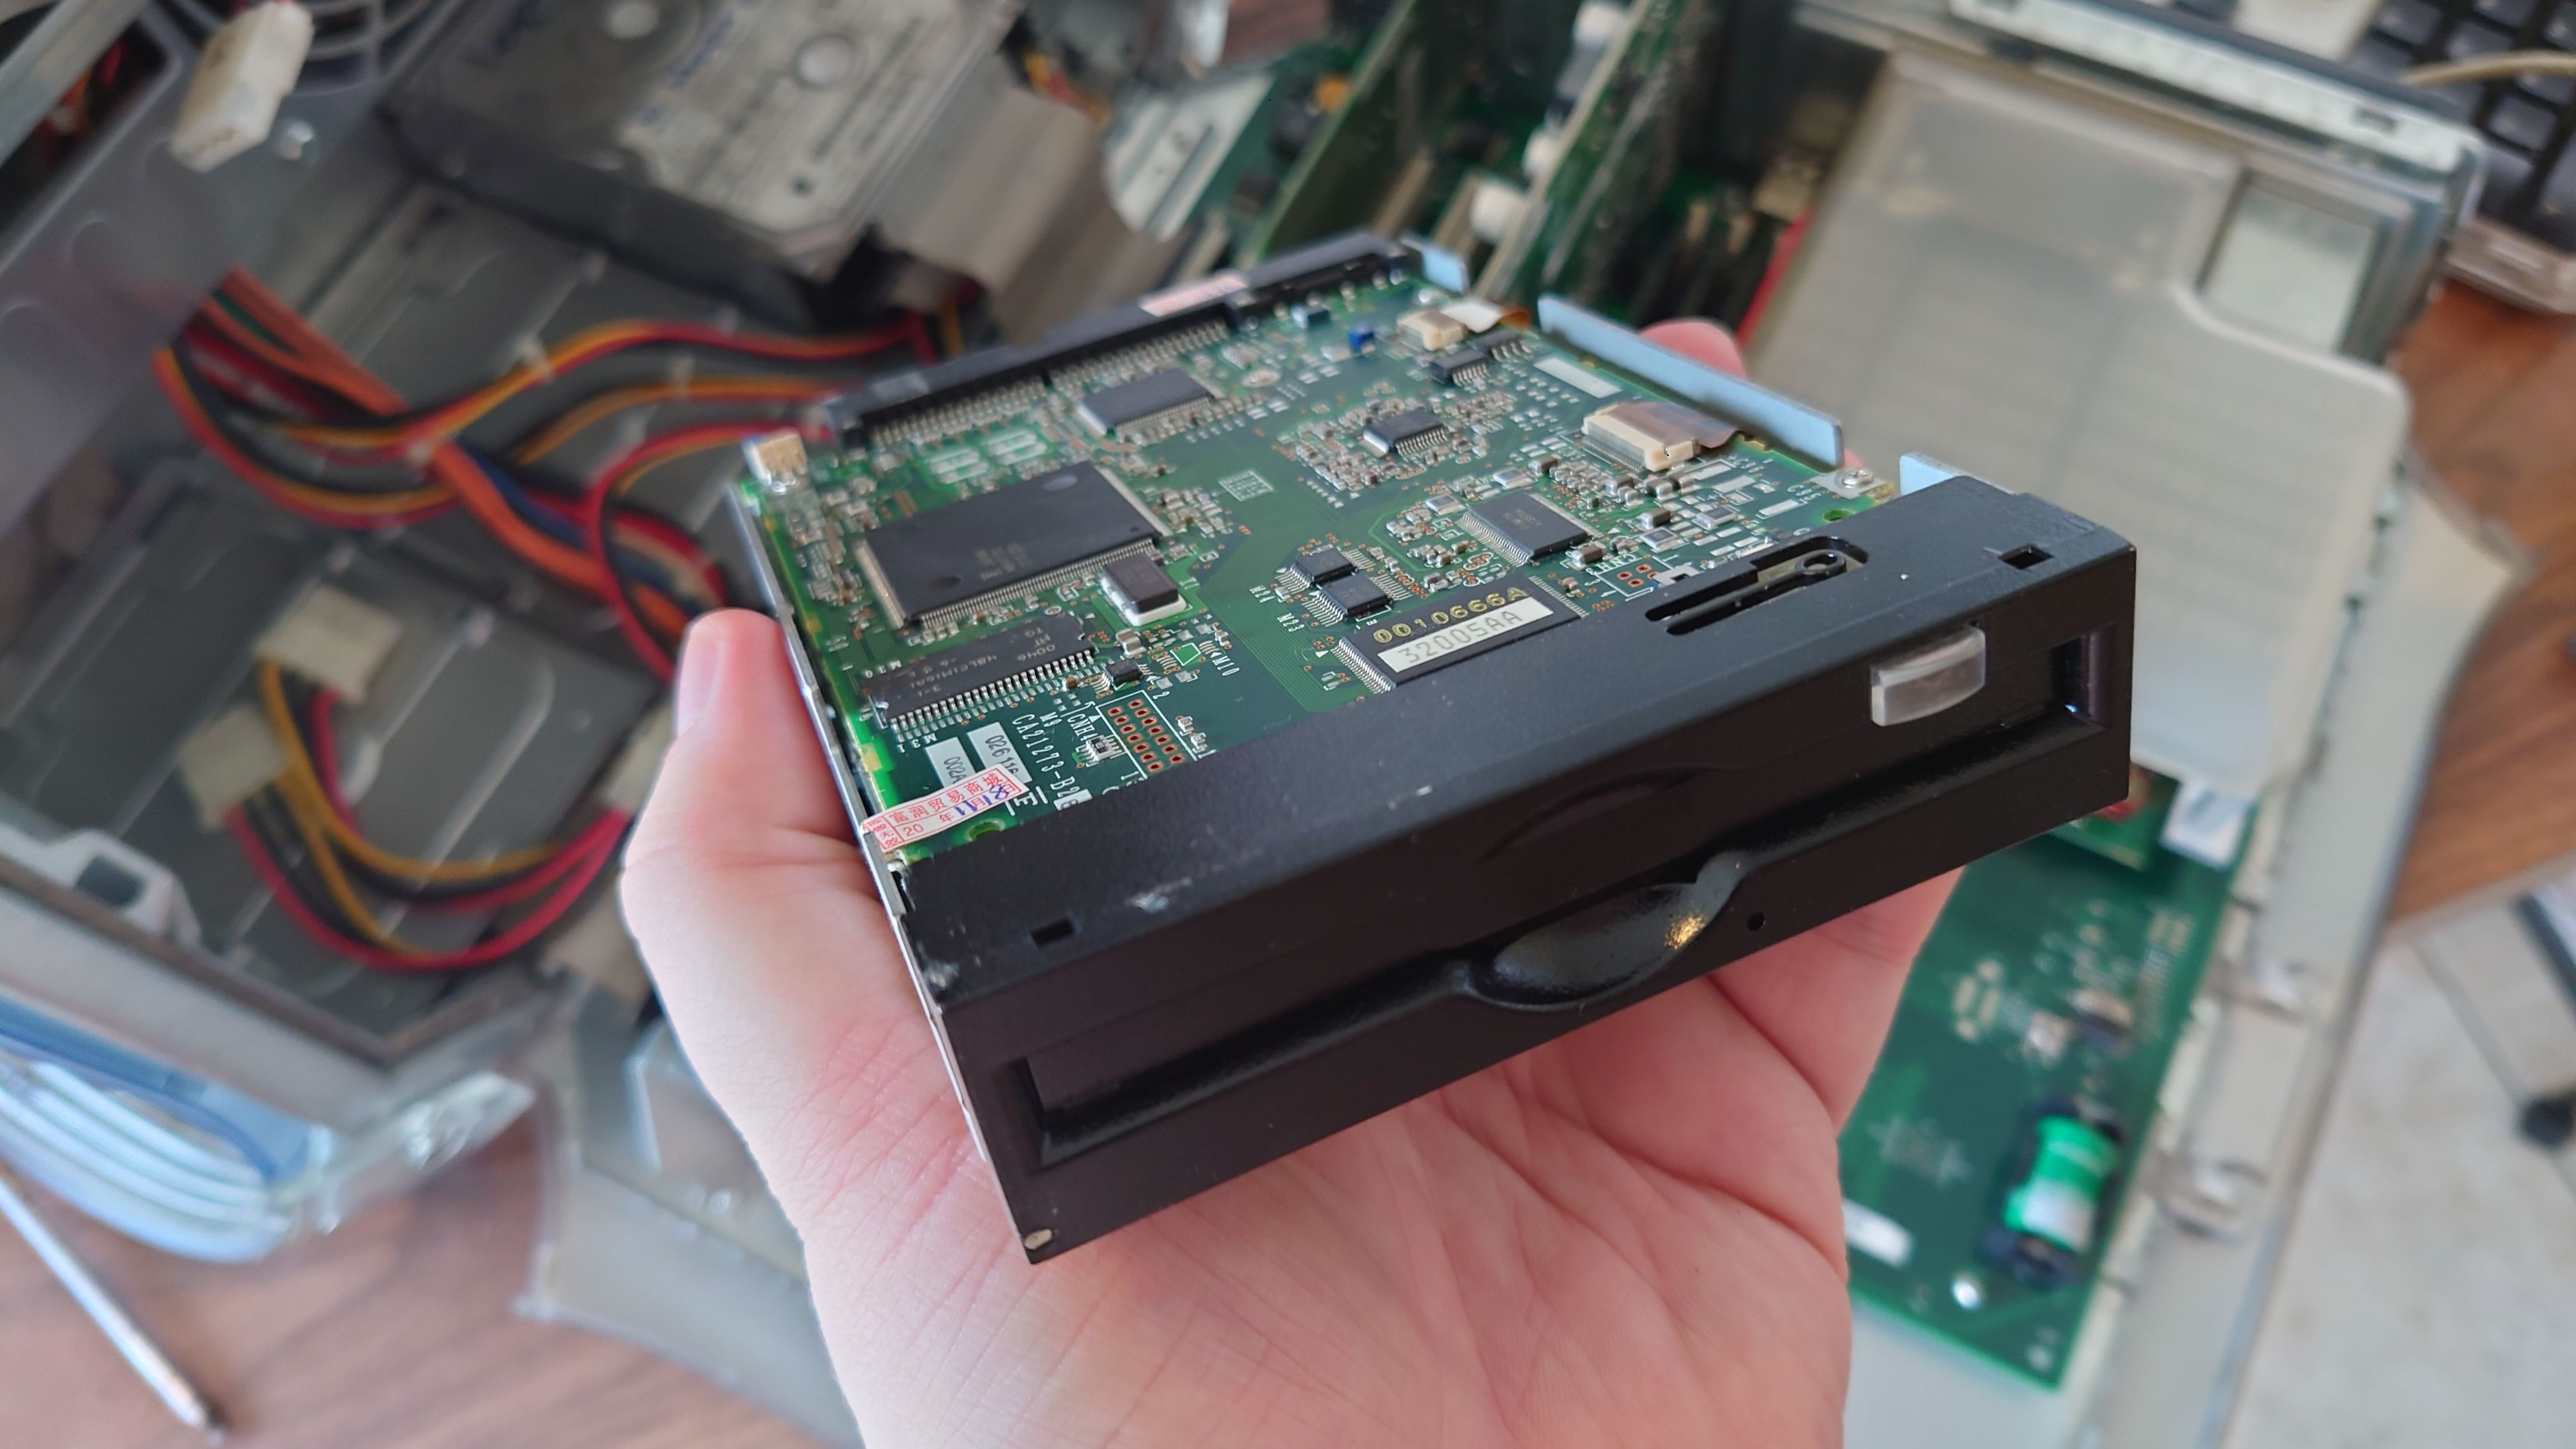 Fitting a Magneto Optical drive into a Power Macintosh G4 